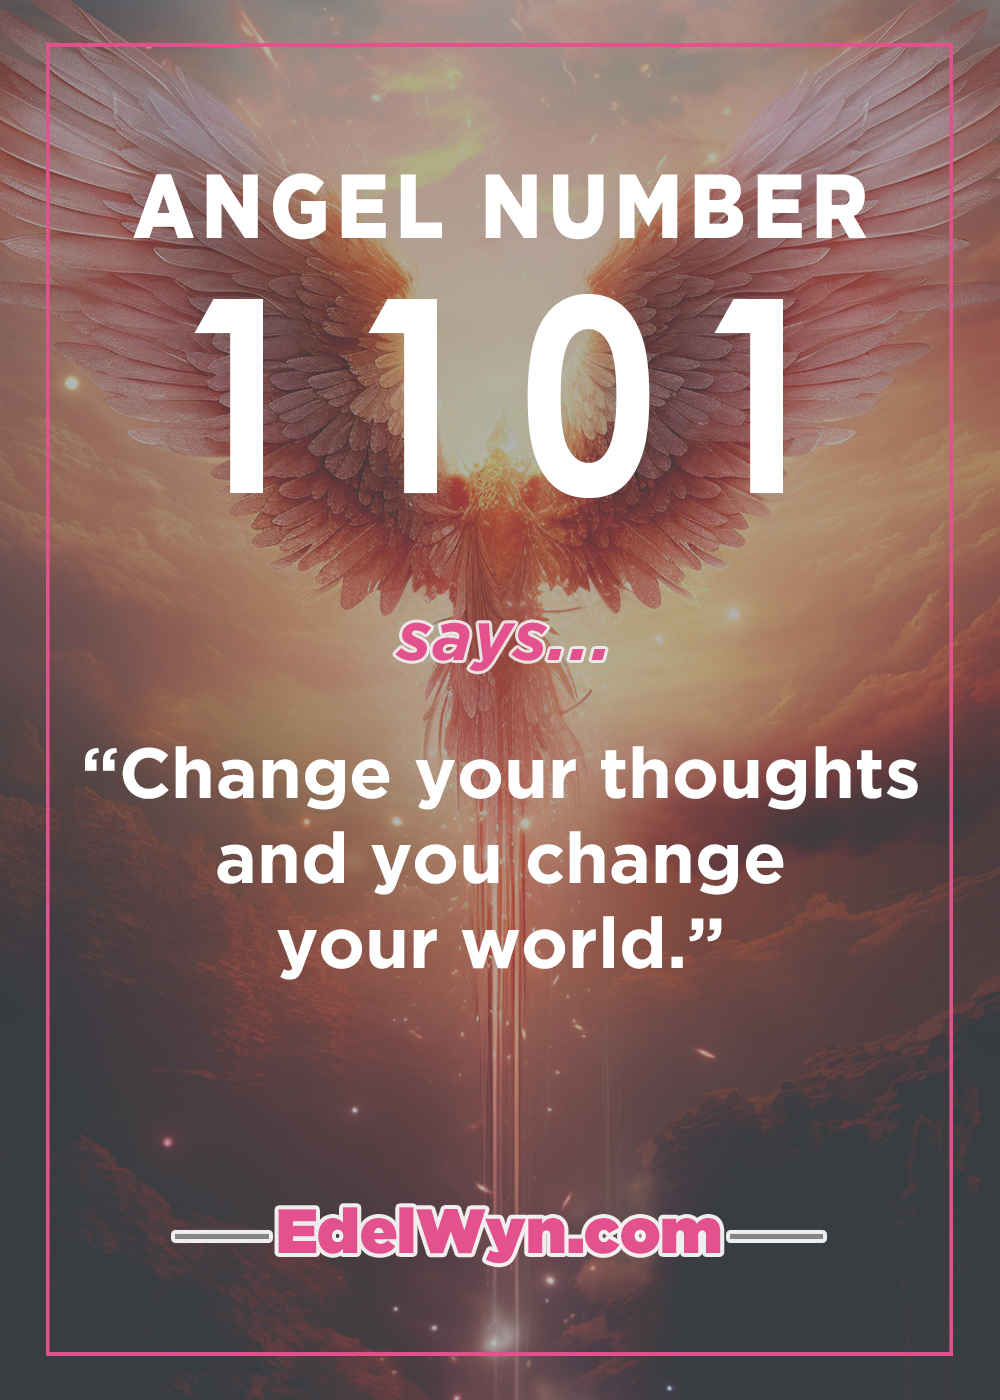 1101 Angel Number Surprises Most People. Here's Why…